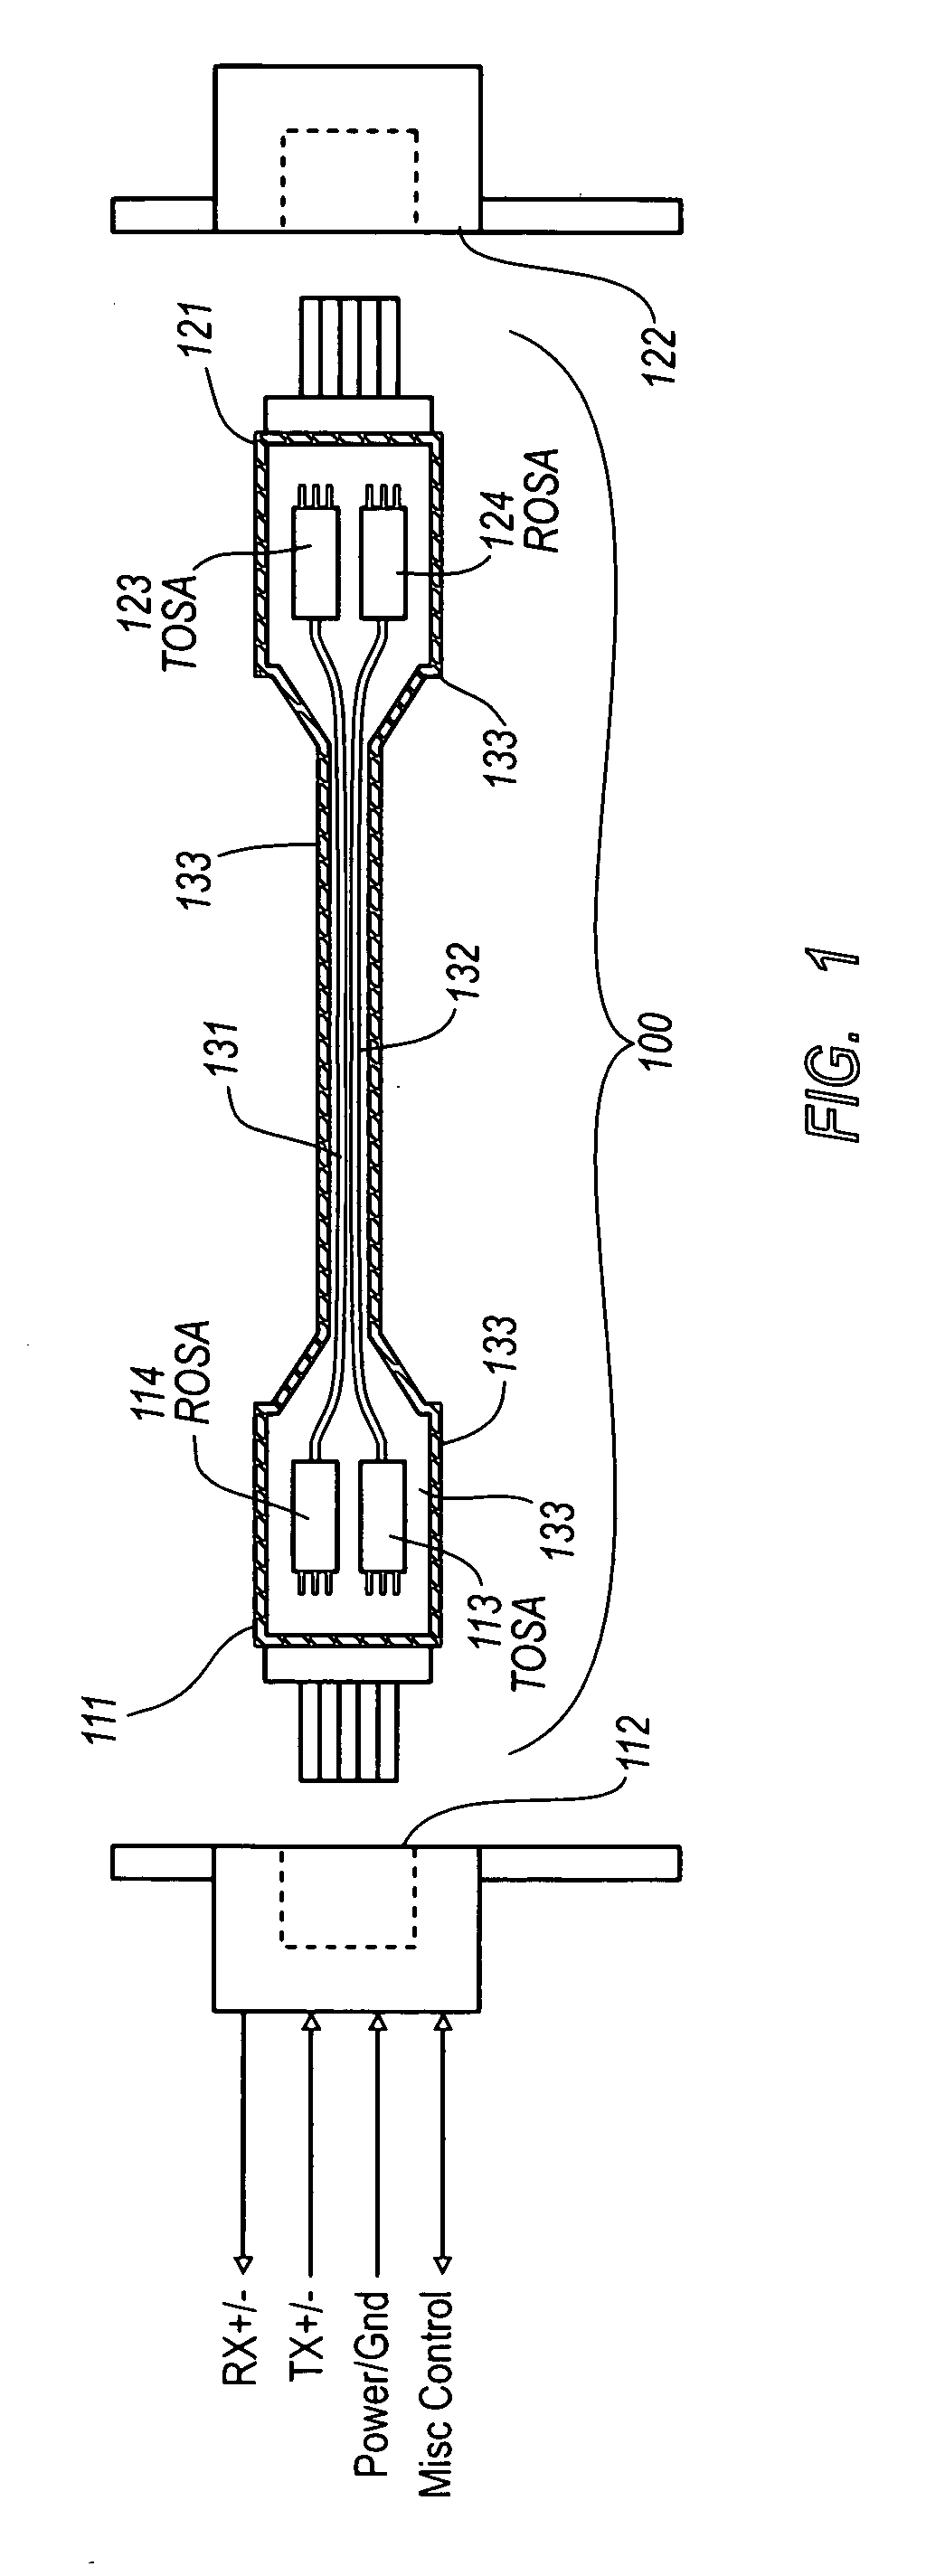 Active optical cable with electrical connector